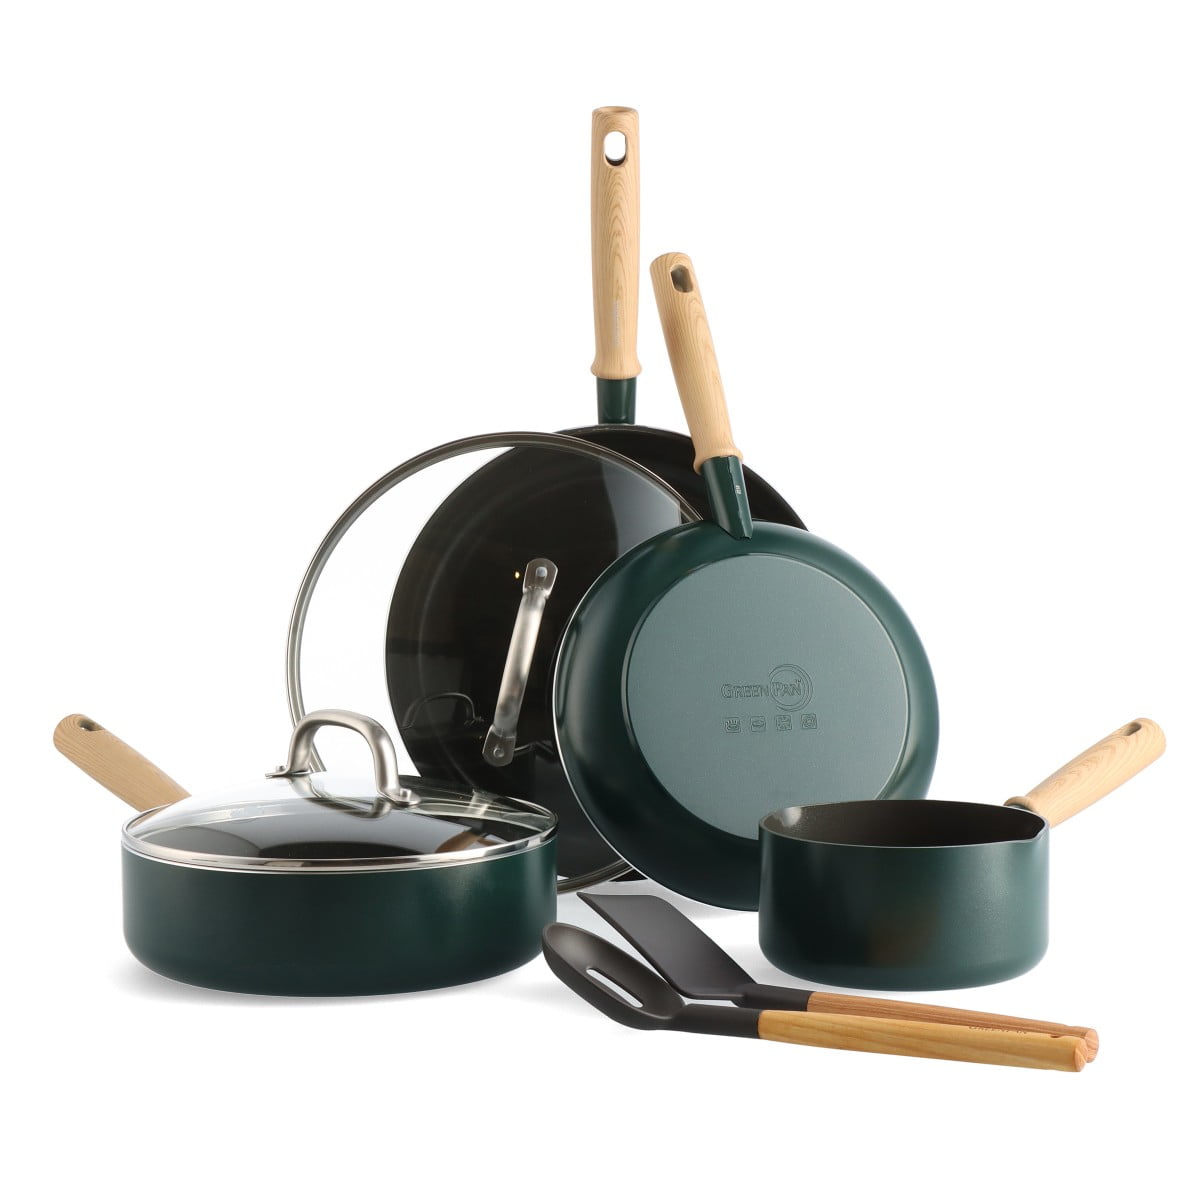 Healthy Non-Toxic PFAS Free Cookware - Platinum Silicone Tools 5-Piece Utensil Set by GreenPan